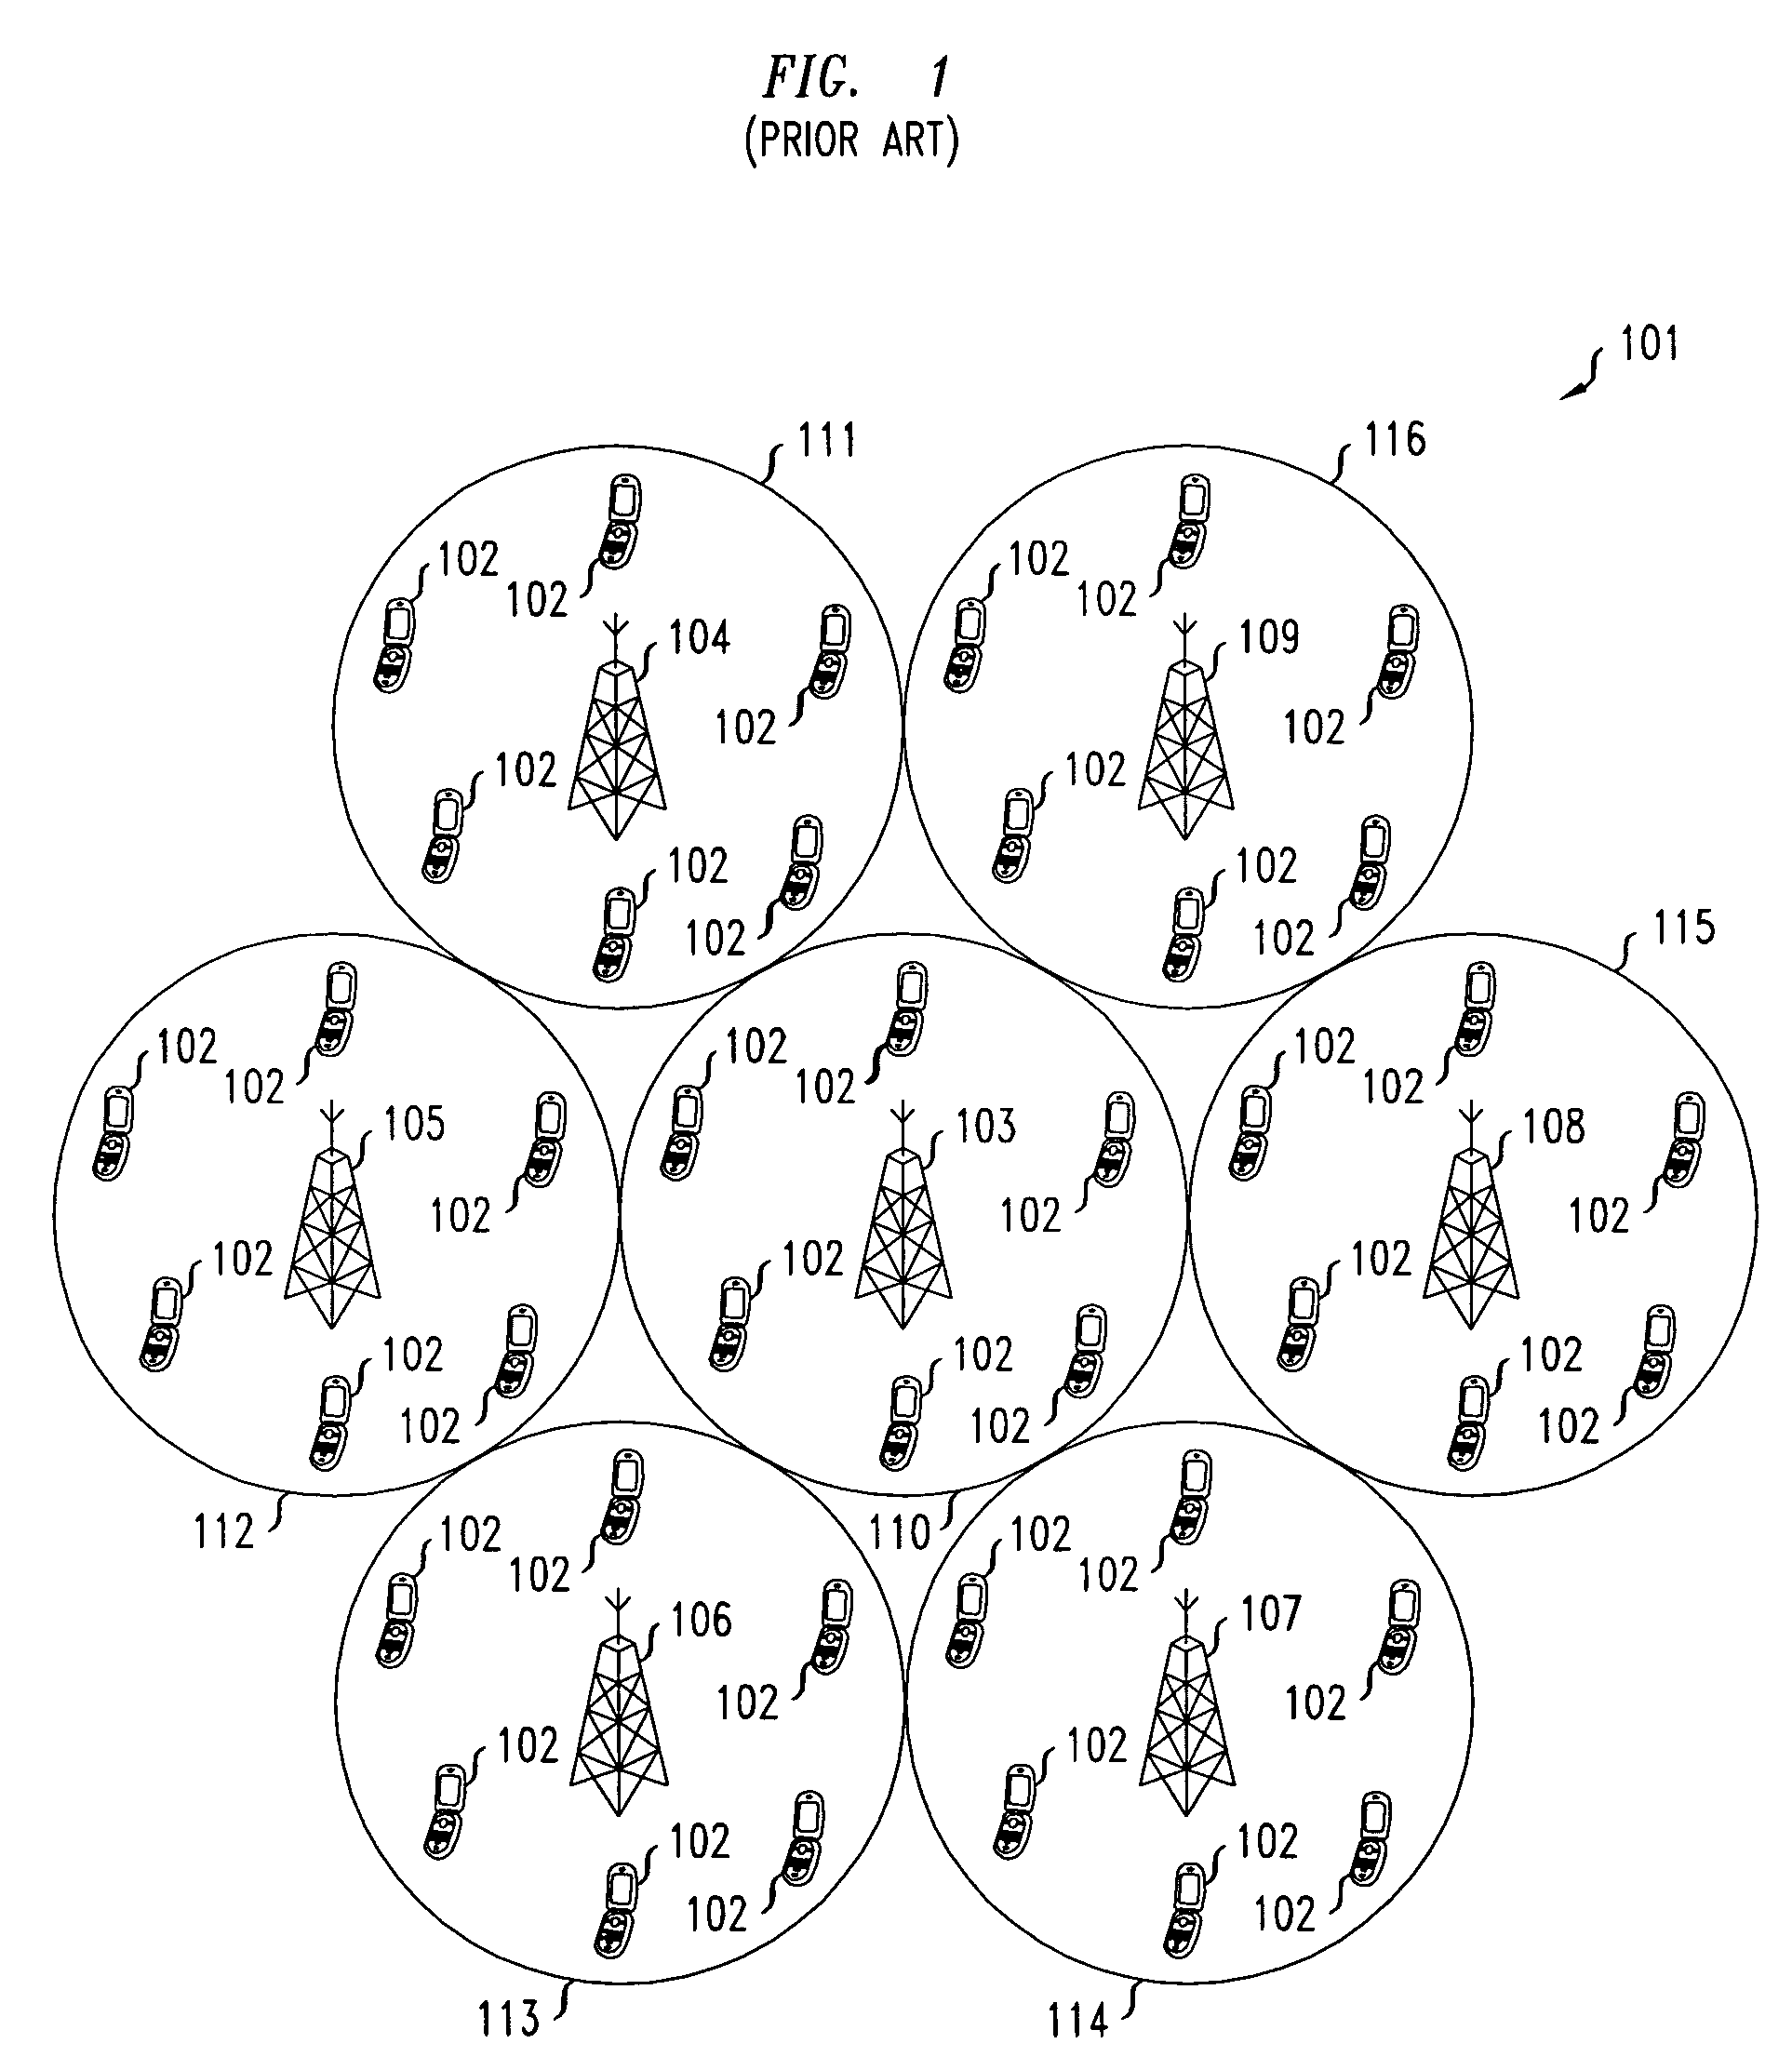 Method for estimating the downlink capacity in a spread spectrum wireless communications system